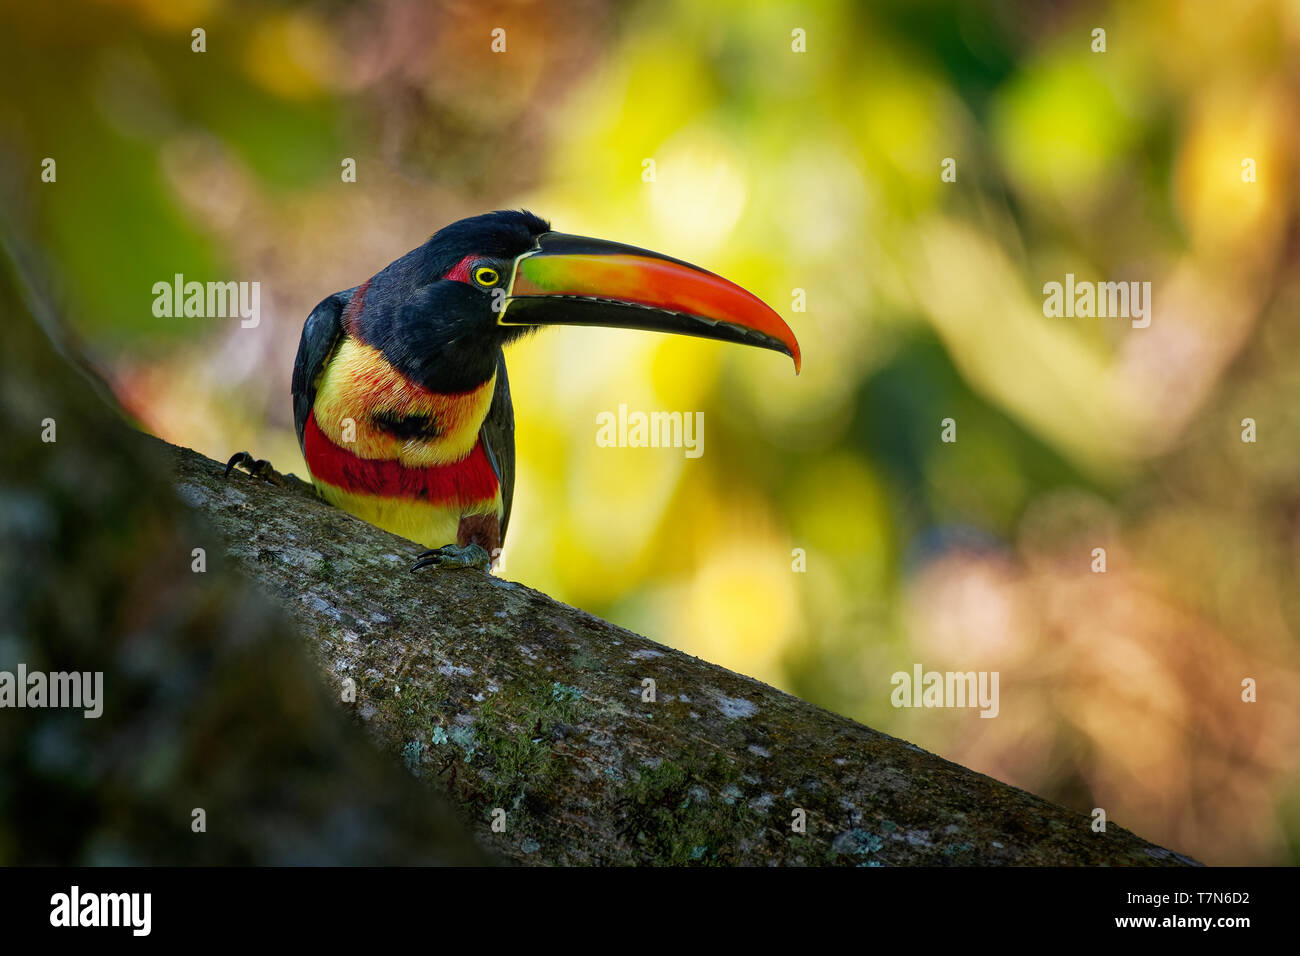 Fiery-billed Aracari - Pteroglossus frantzii is a toucan, a near-passerine bird. It breeds only on the Pacific slopes of southern Costa Rica and weste Stock Photo